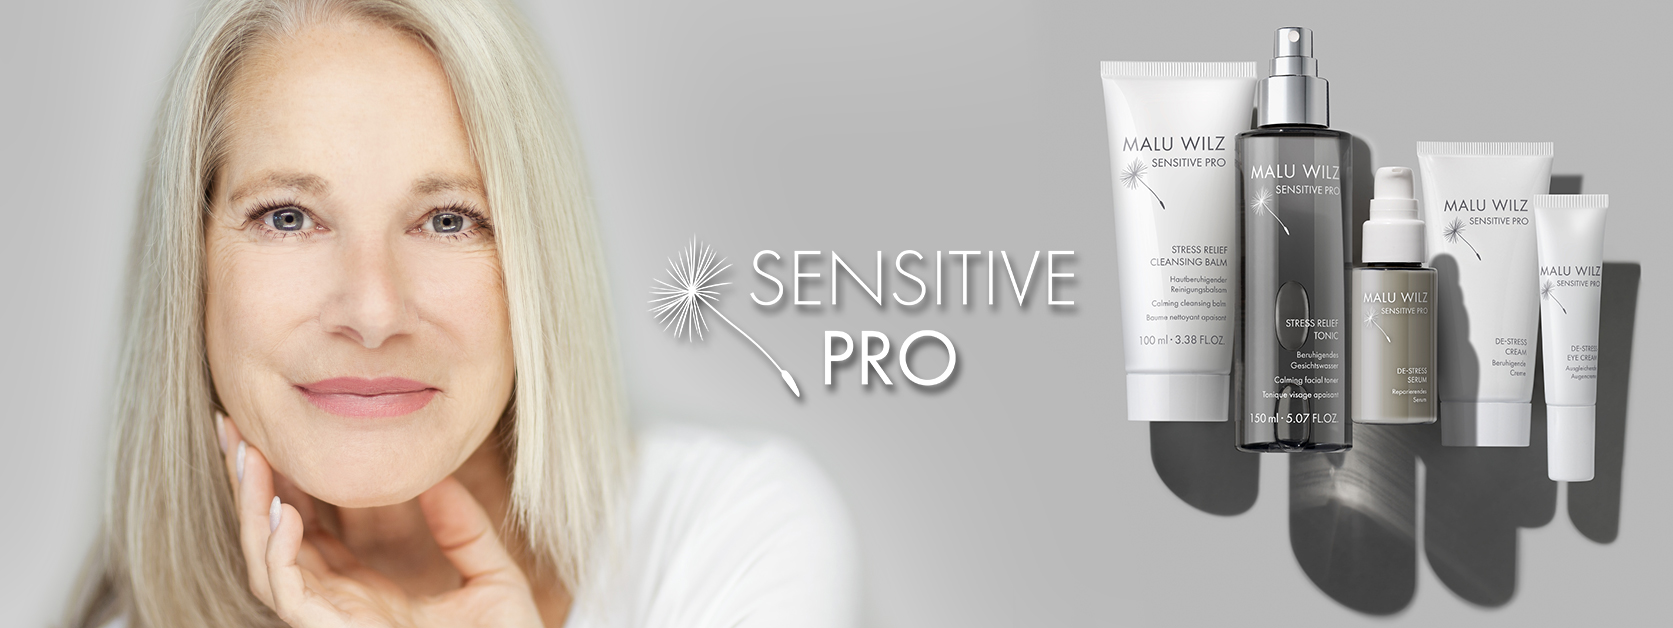 Woman with sensitive skin and skin care products